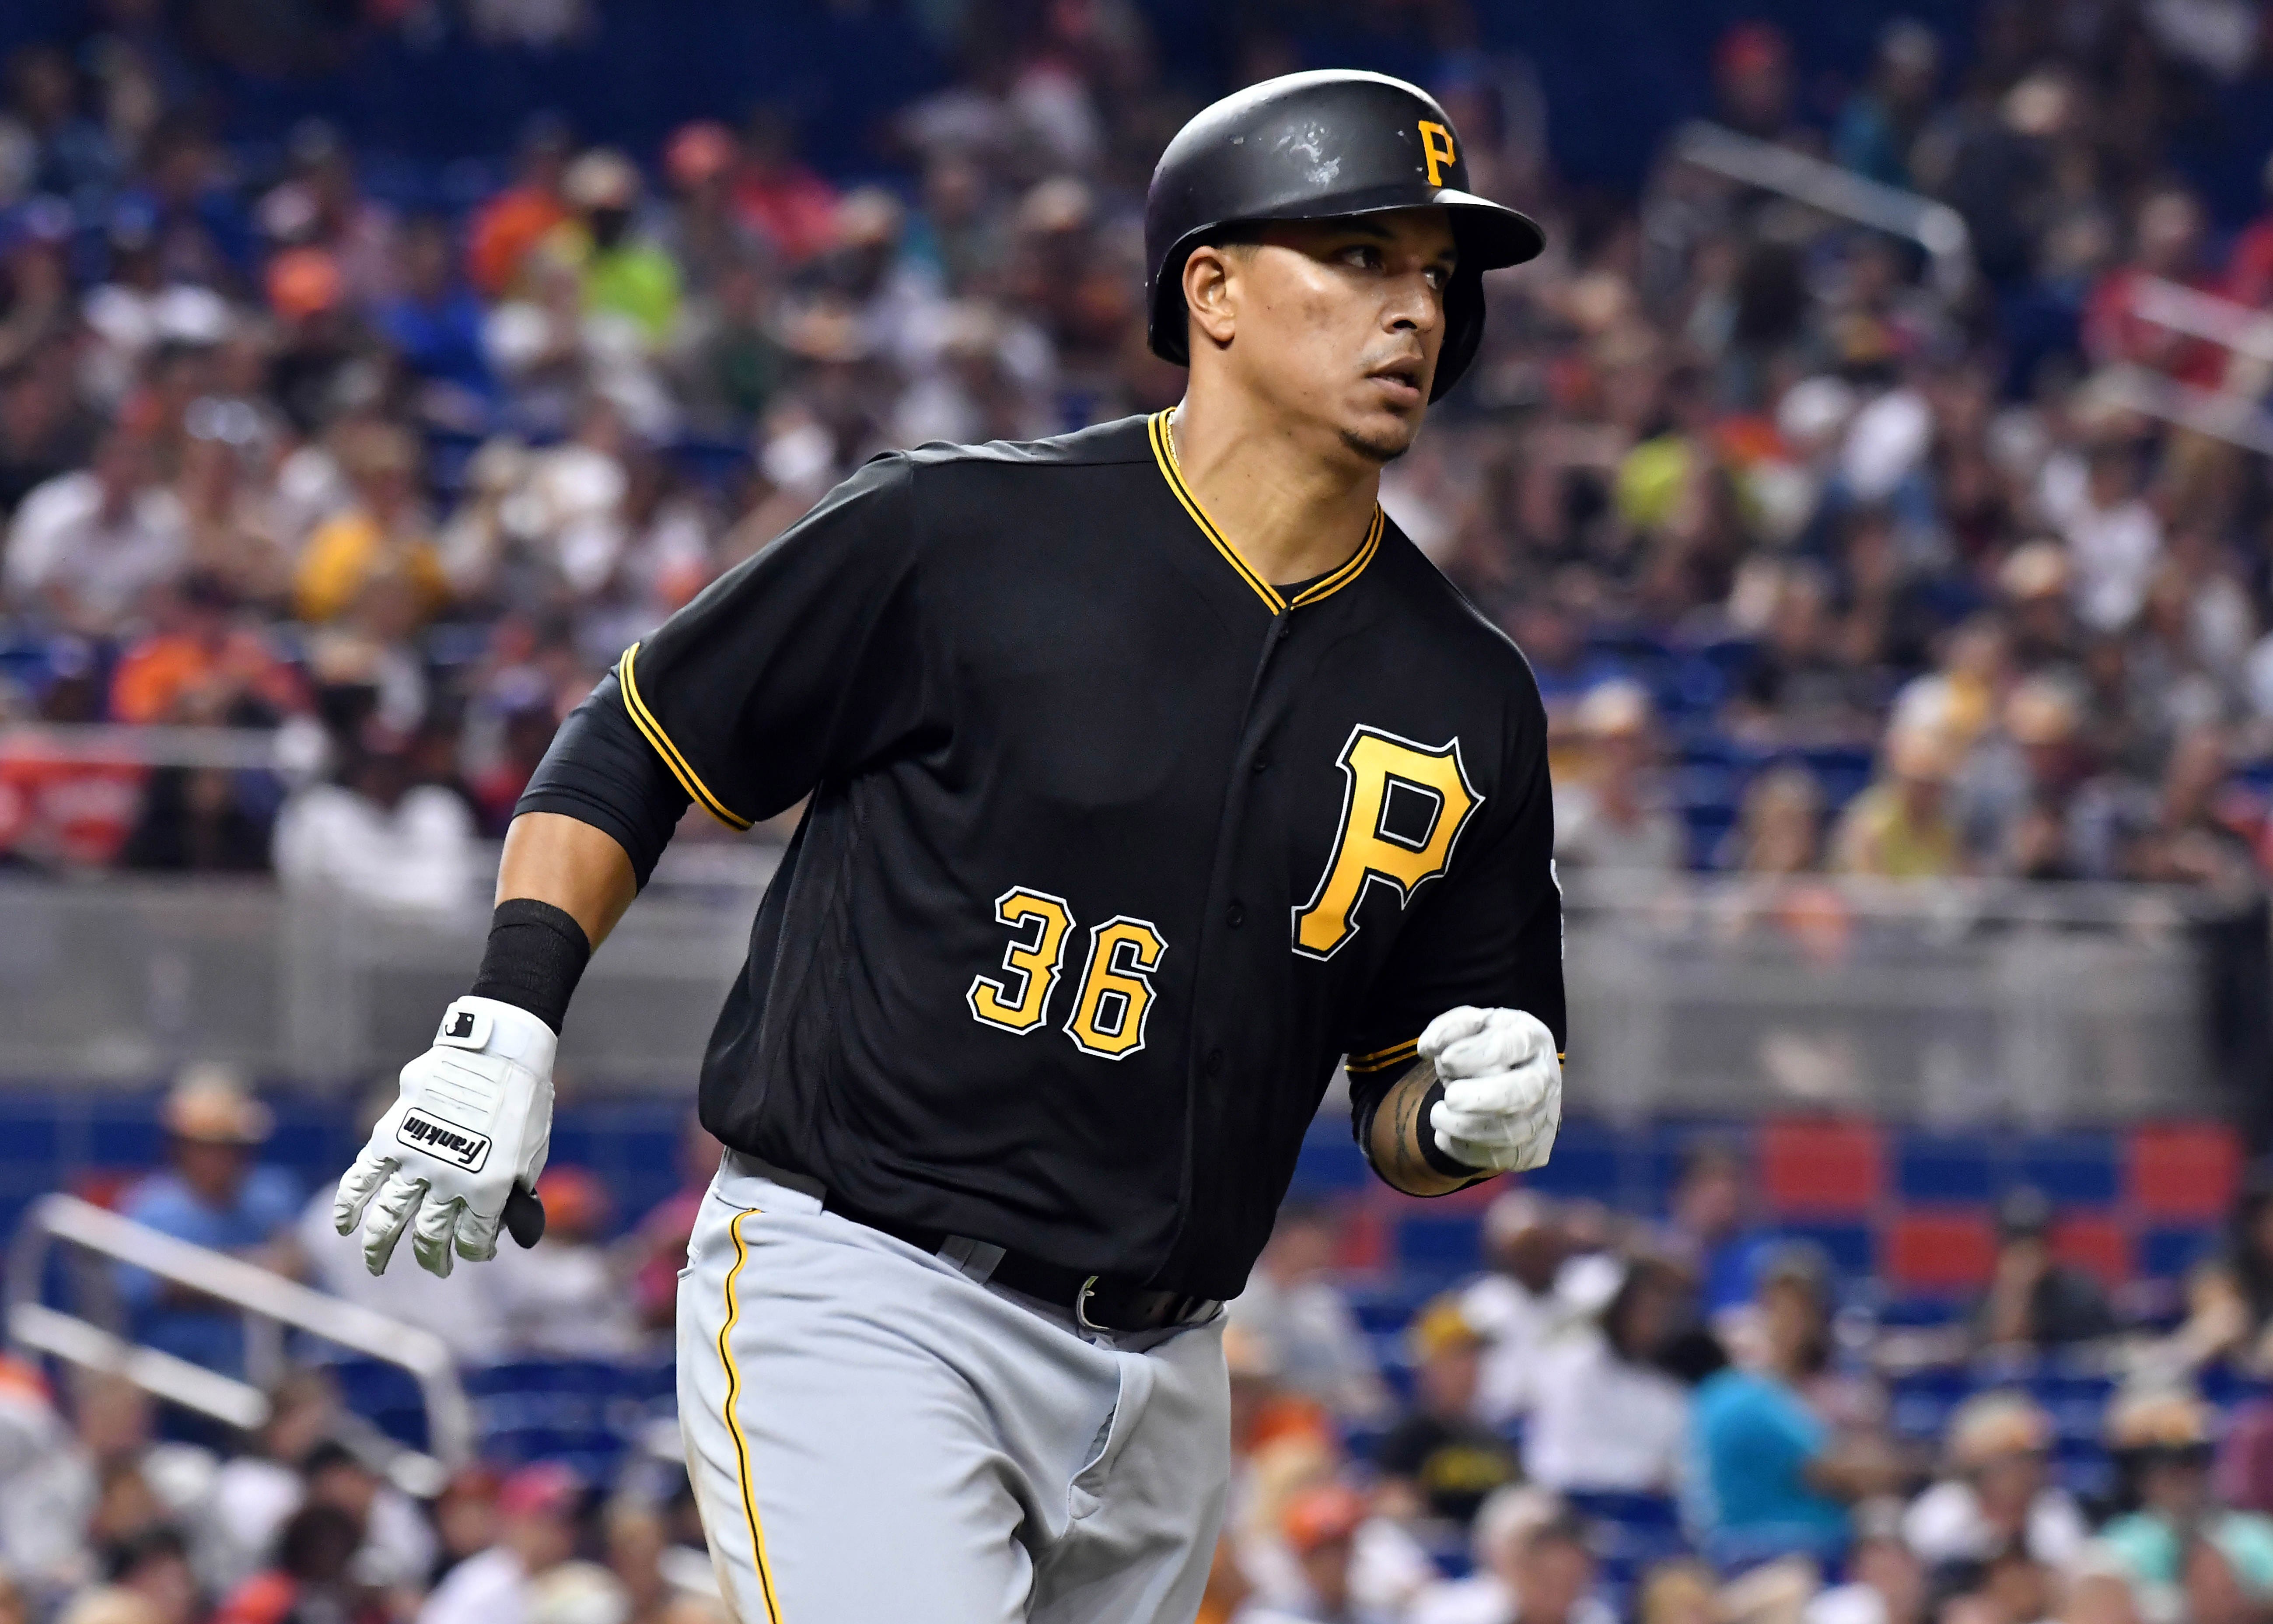 Pittsburgh Pirates top 30 prospect stat update 5/15